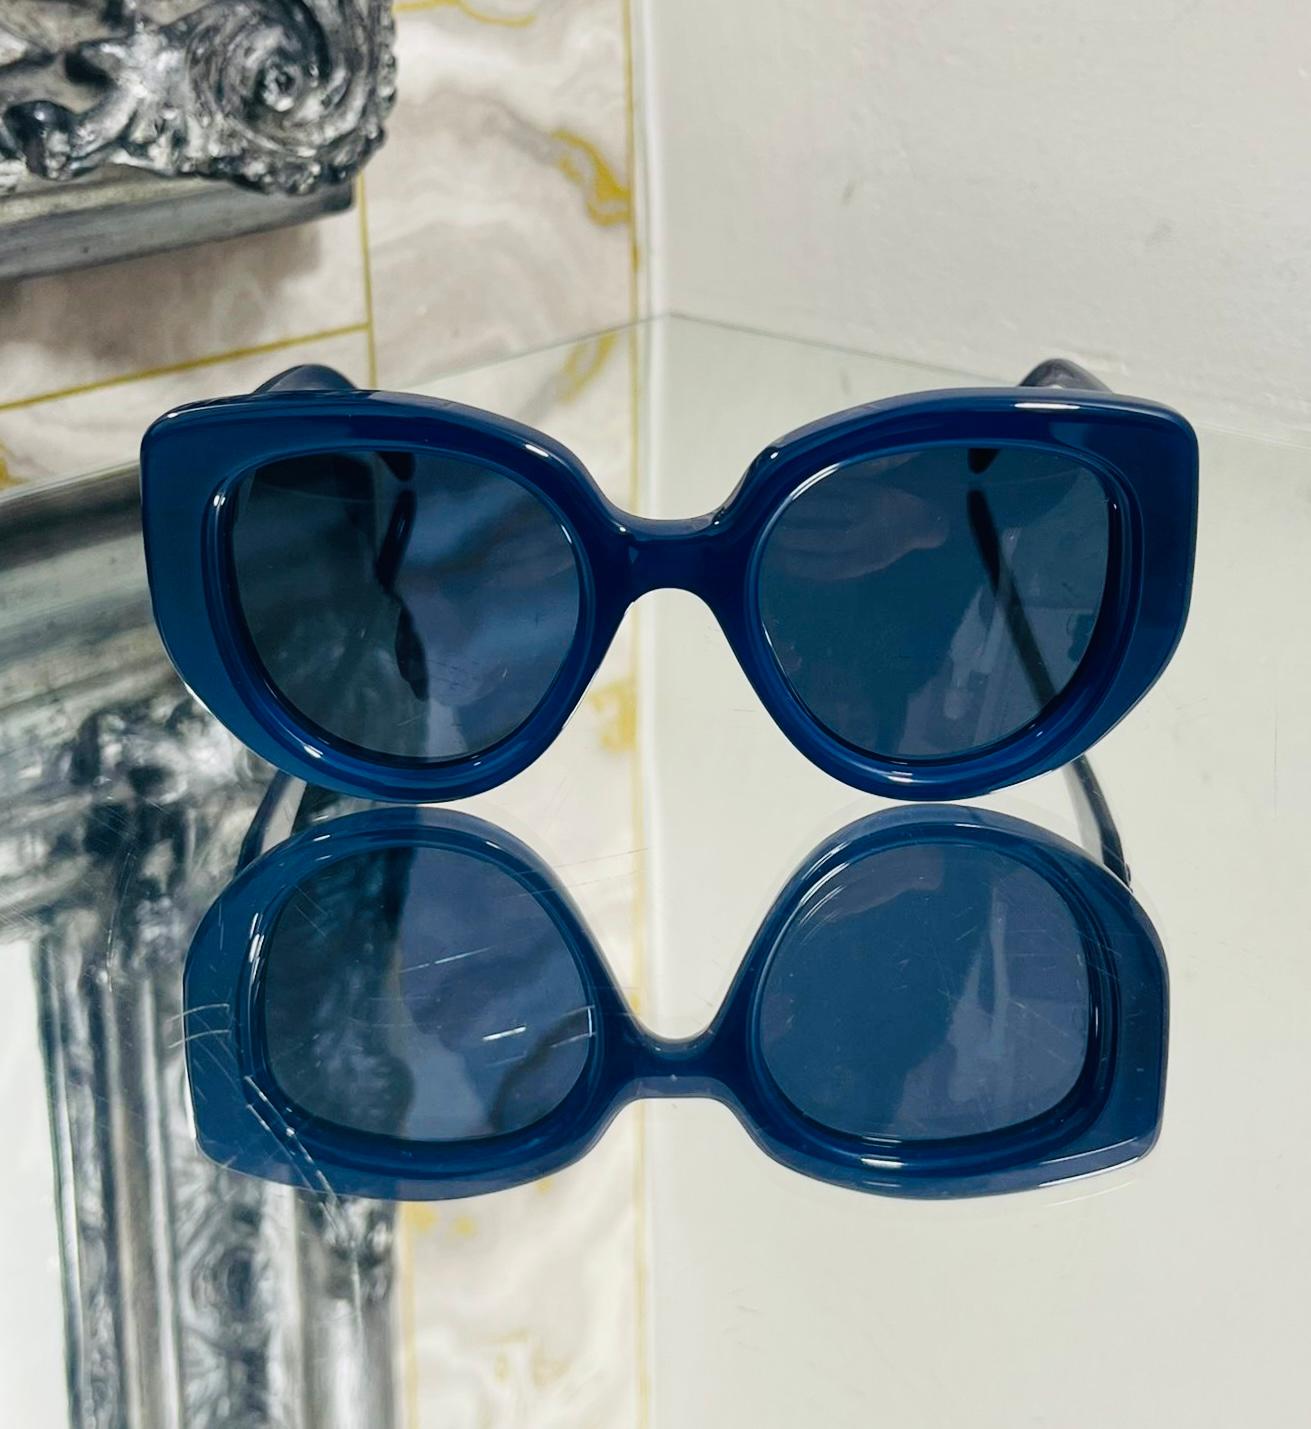 Loewe Round Sunglasses

Blue, fully rimmed sunglasses designed with thick frames and blue lenses.

Featuring tonal 'Loewe' logo lettering to the arm.

Size – One Size

Condition – Good (Light scratches, general signs of wear)

Composition –